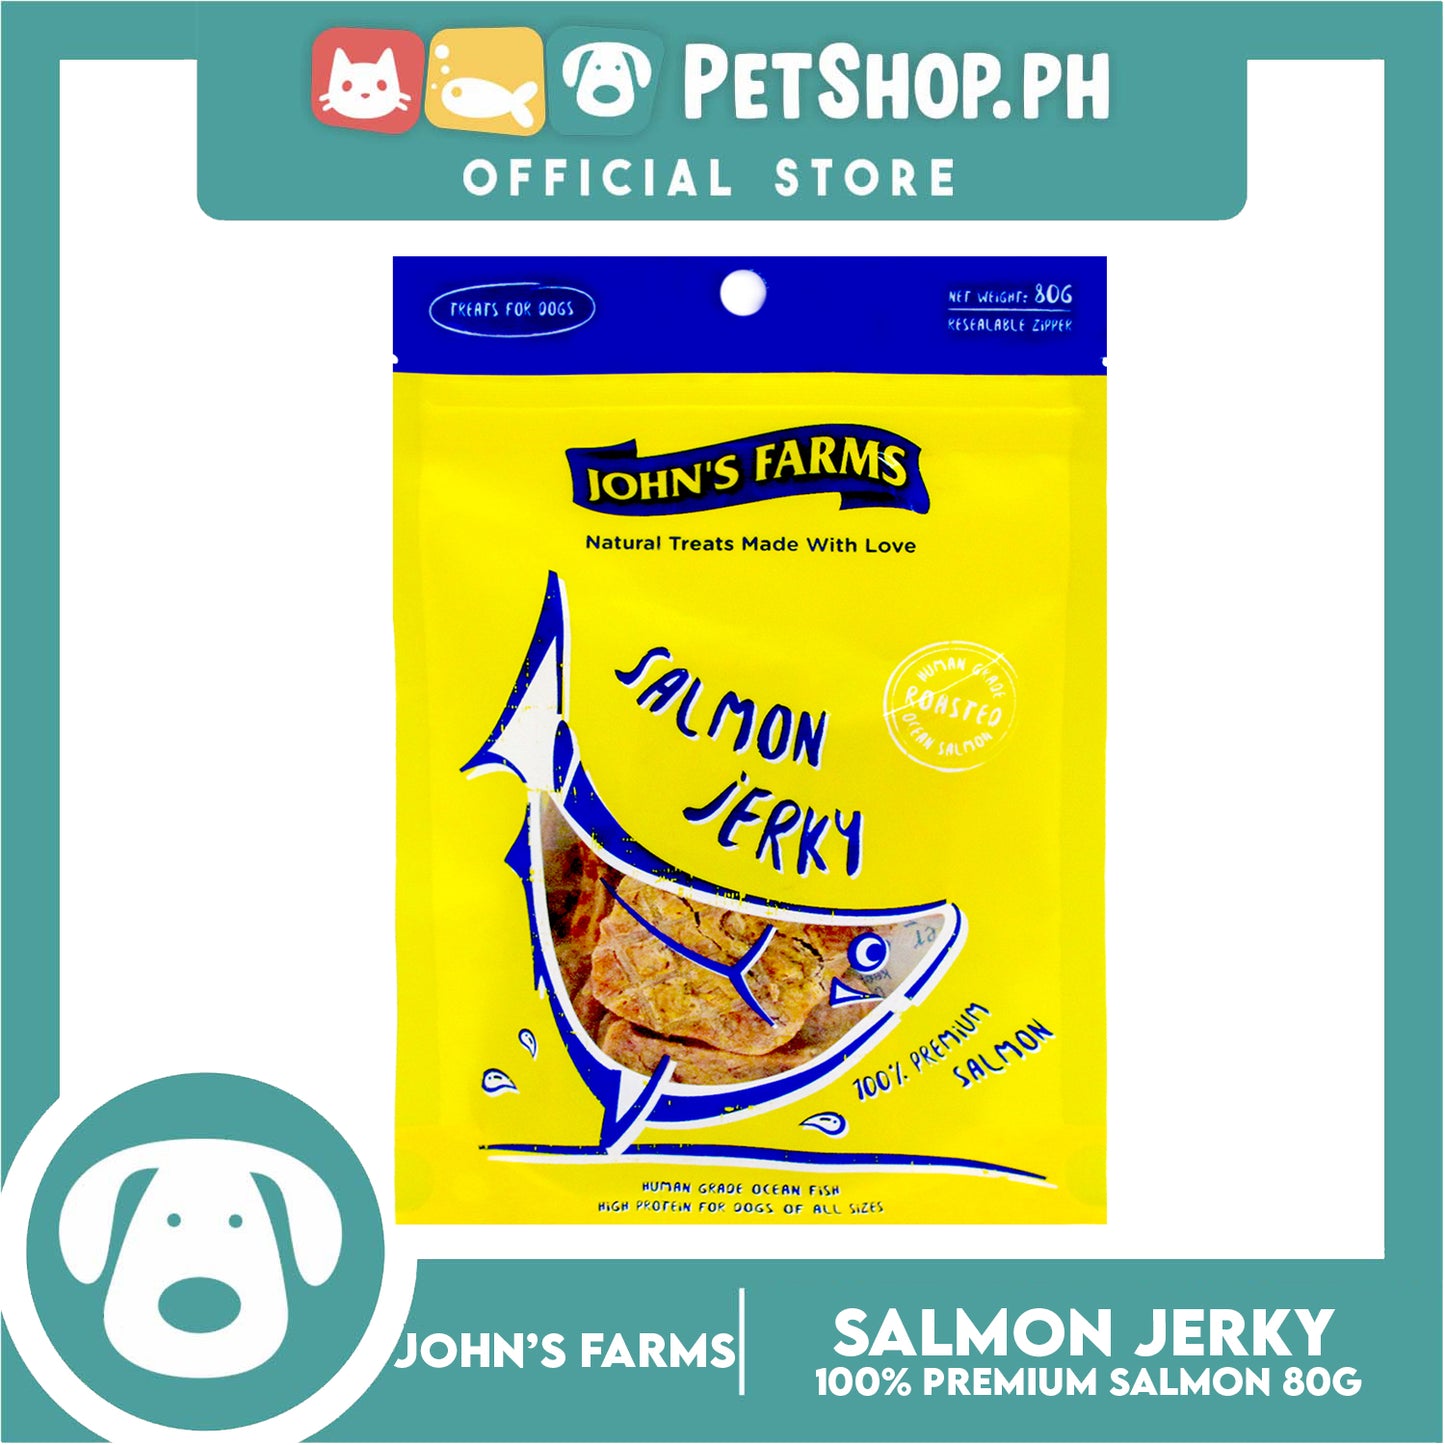 John's Farms Dog Food, High Protein For Dogs Of All Sizes, Resealable Zipper 80g (Salmon Jerky) Dog Treats